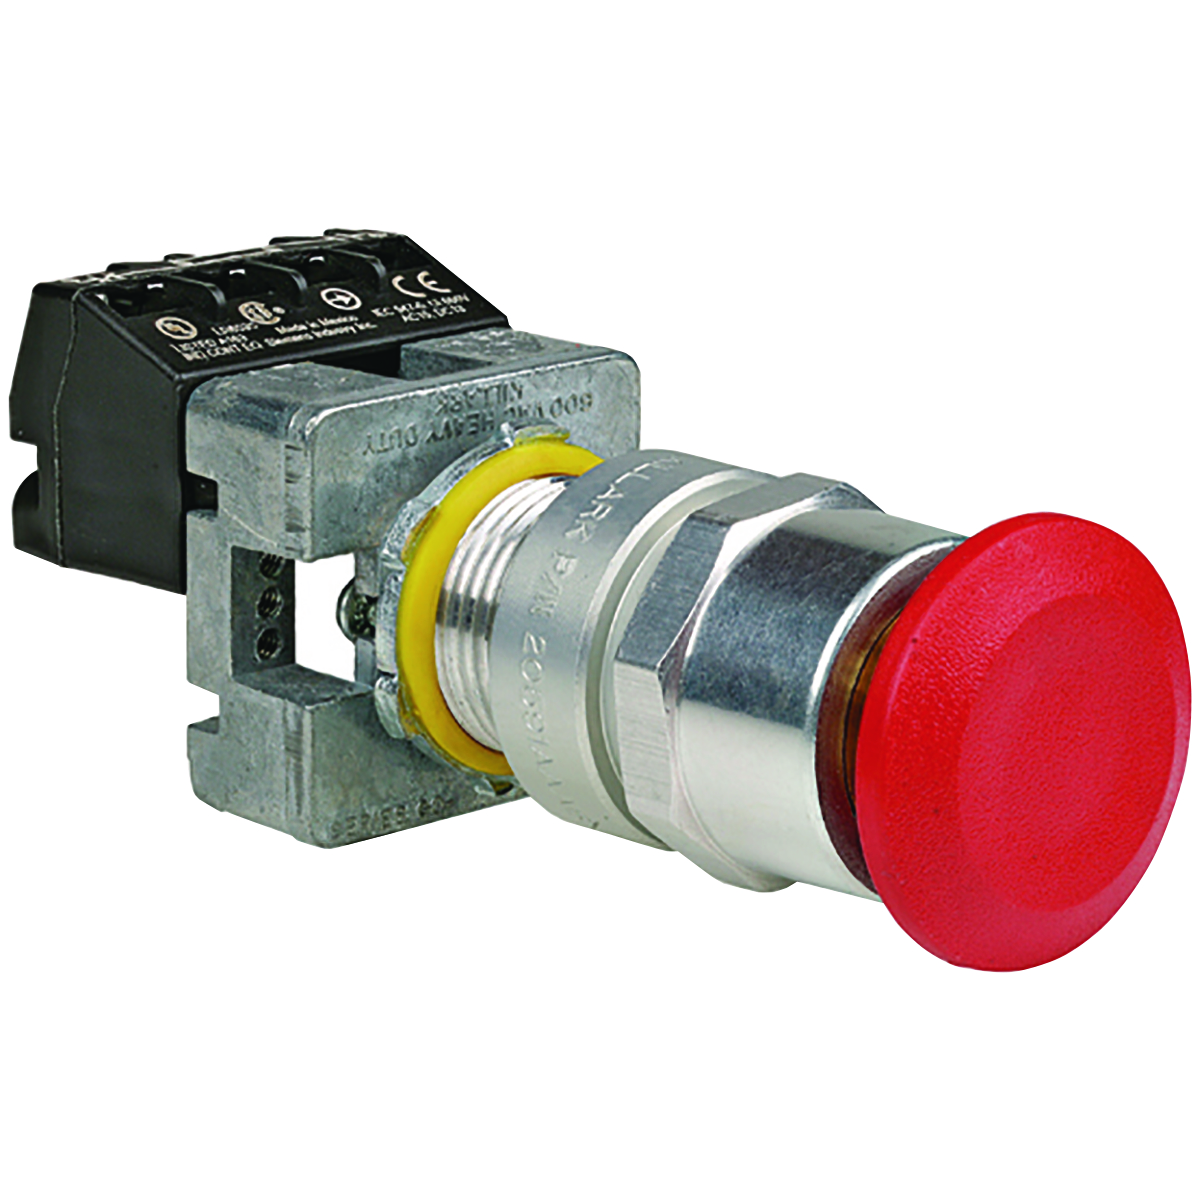 G SERIES - ALUMINUM EXTENDED MOMENTARY CONTACT SINGLE PUSH/PULL BUTTONOPERATOR - RED MUSHROOM BUTTON WITH BLANK NAMEPLATE - 1NO/1NC CONTACTRATING